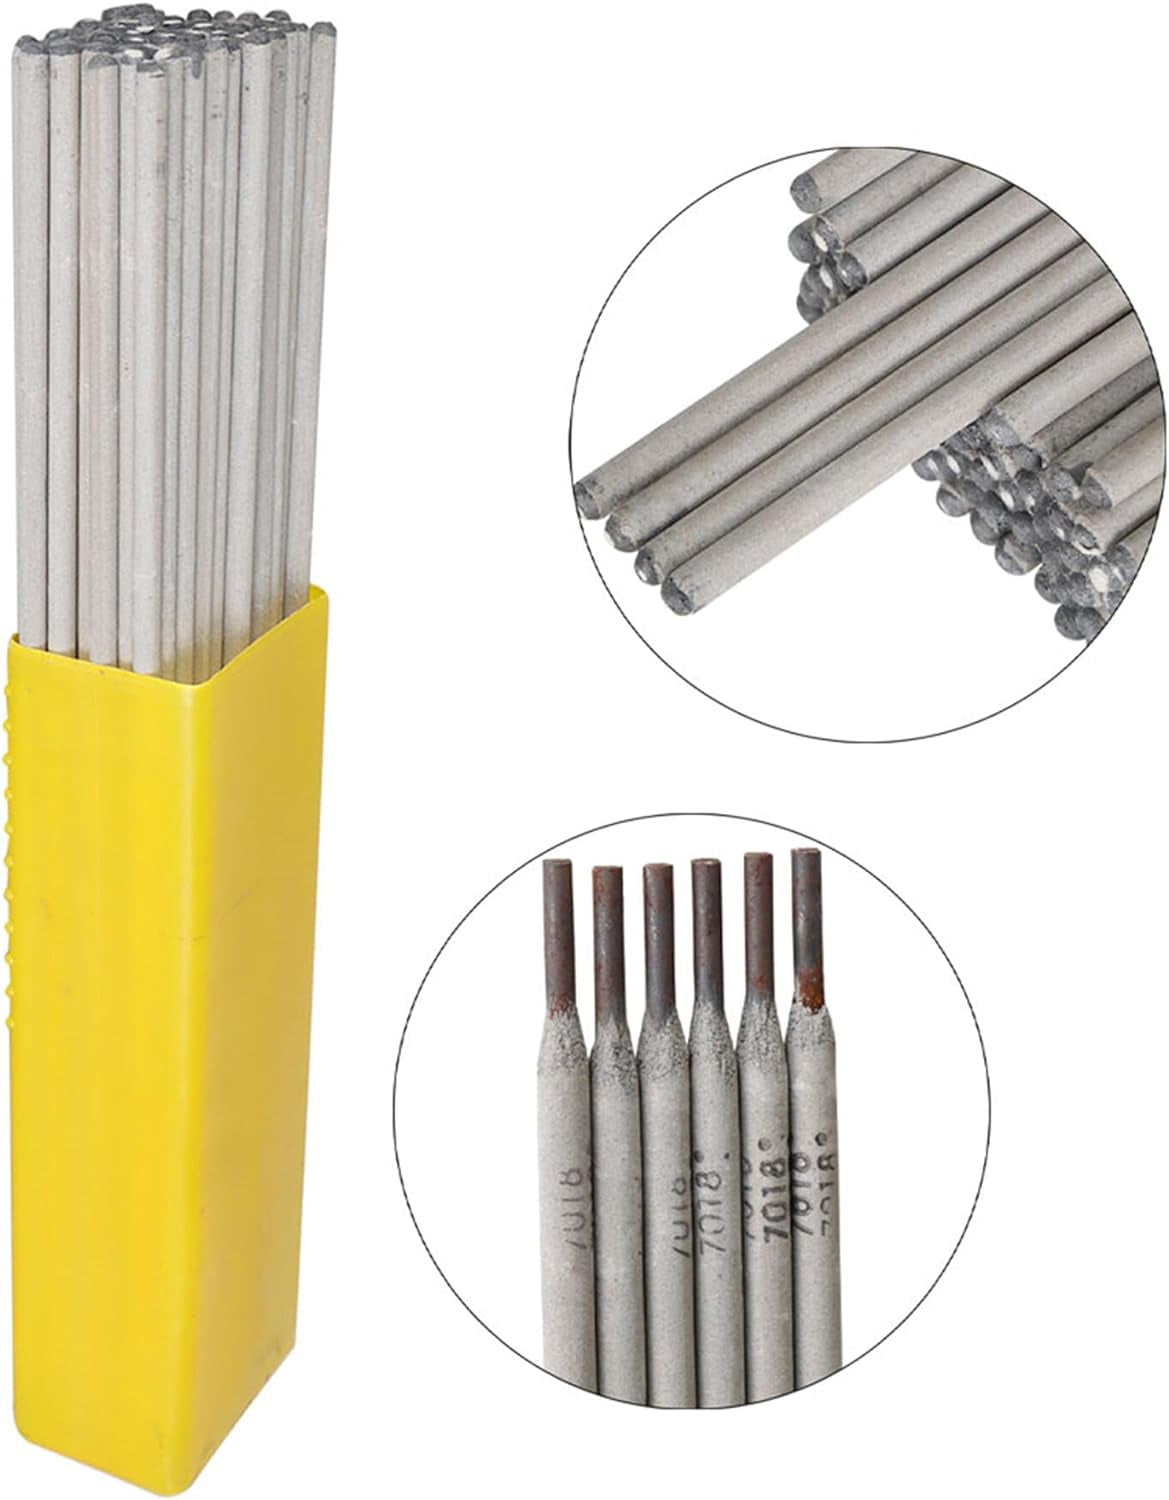 50 Lbs E7018 5/32 Inch Arc Welding Rods Carbon Steel Electrode